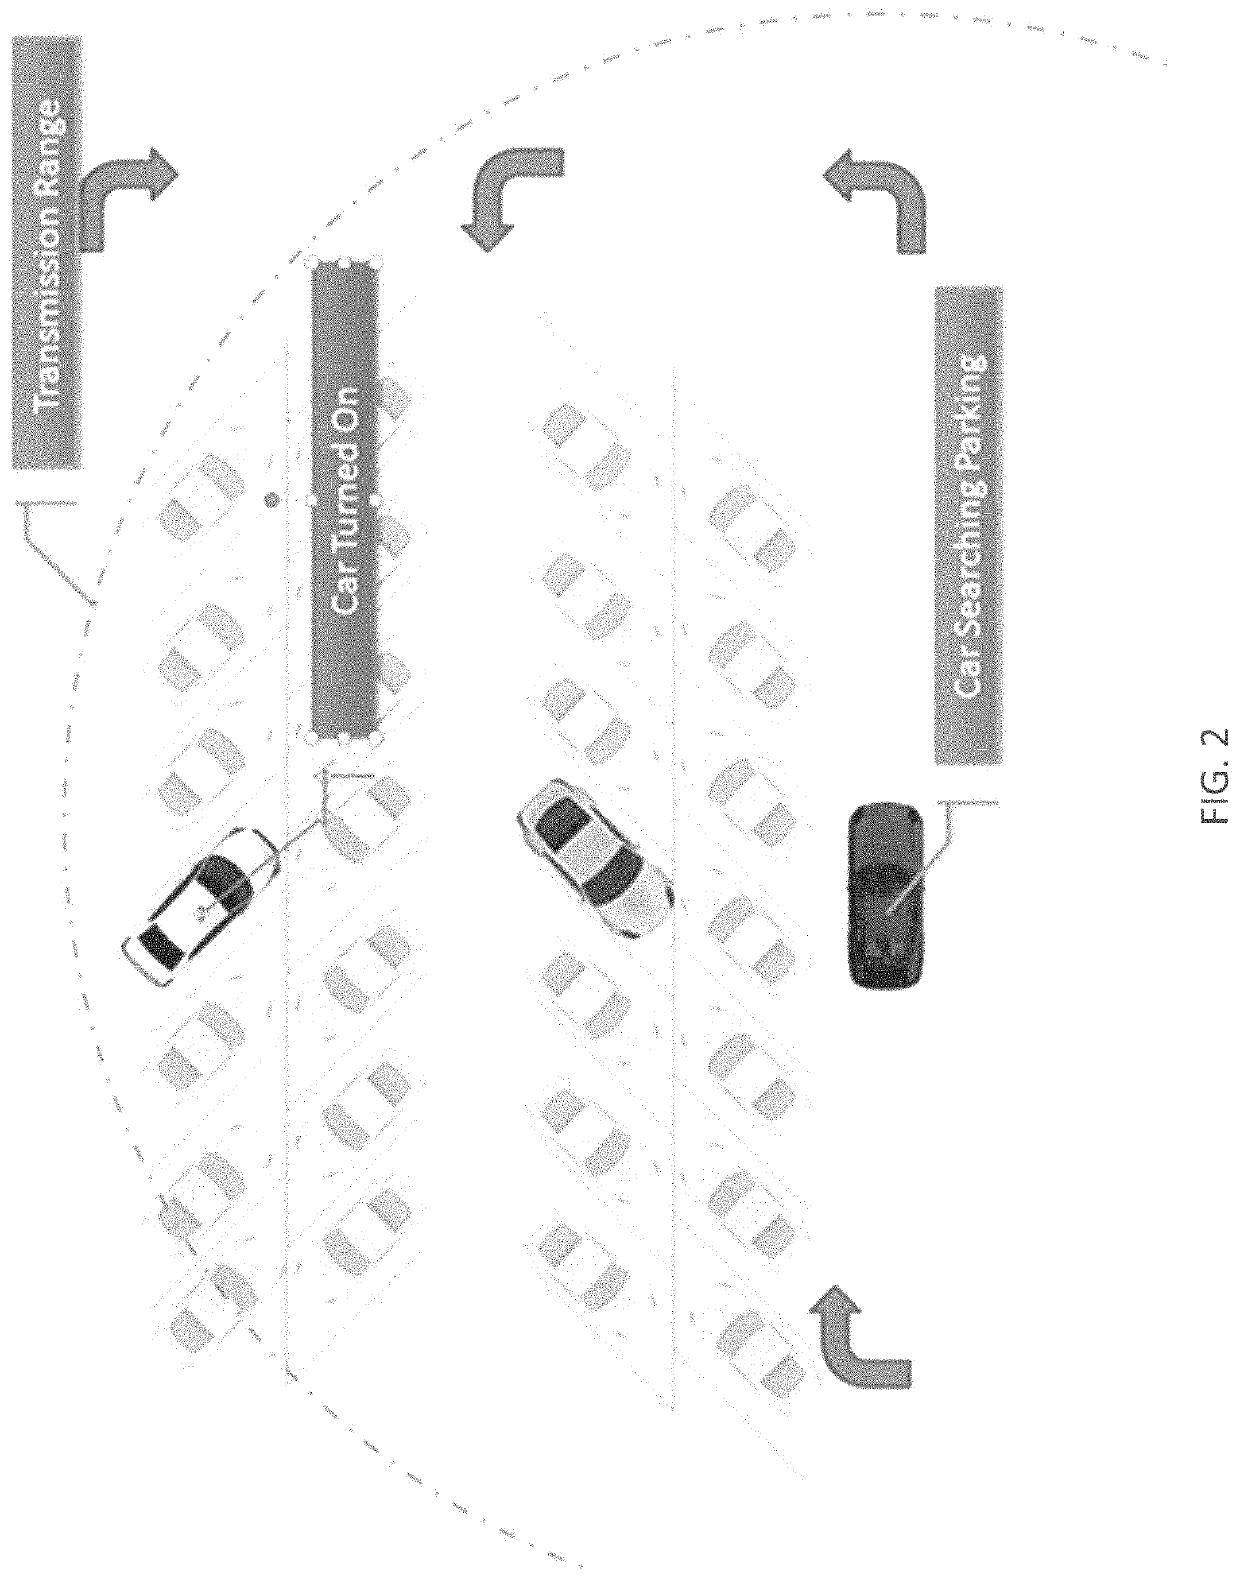 Vehicle-to-vehicle dynamic parking finder assistant